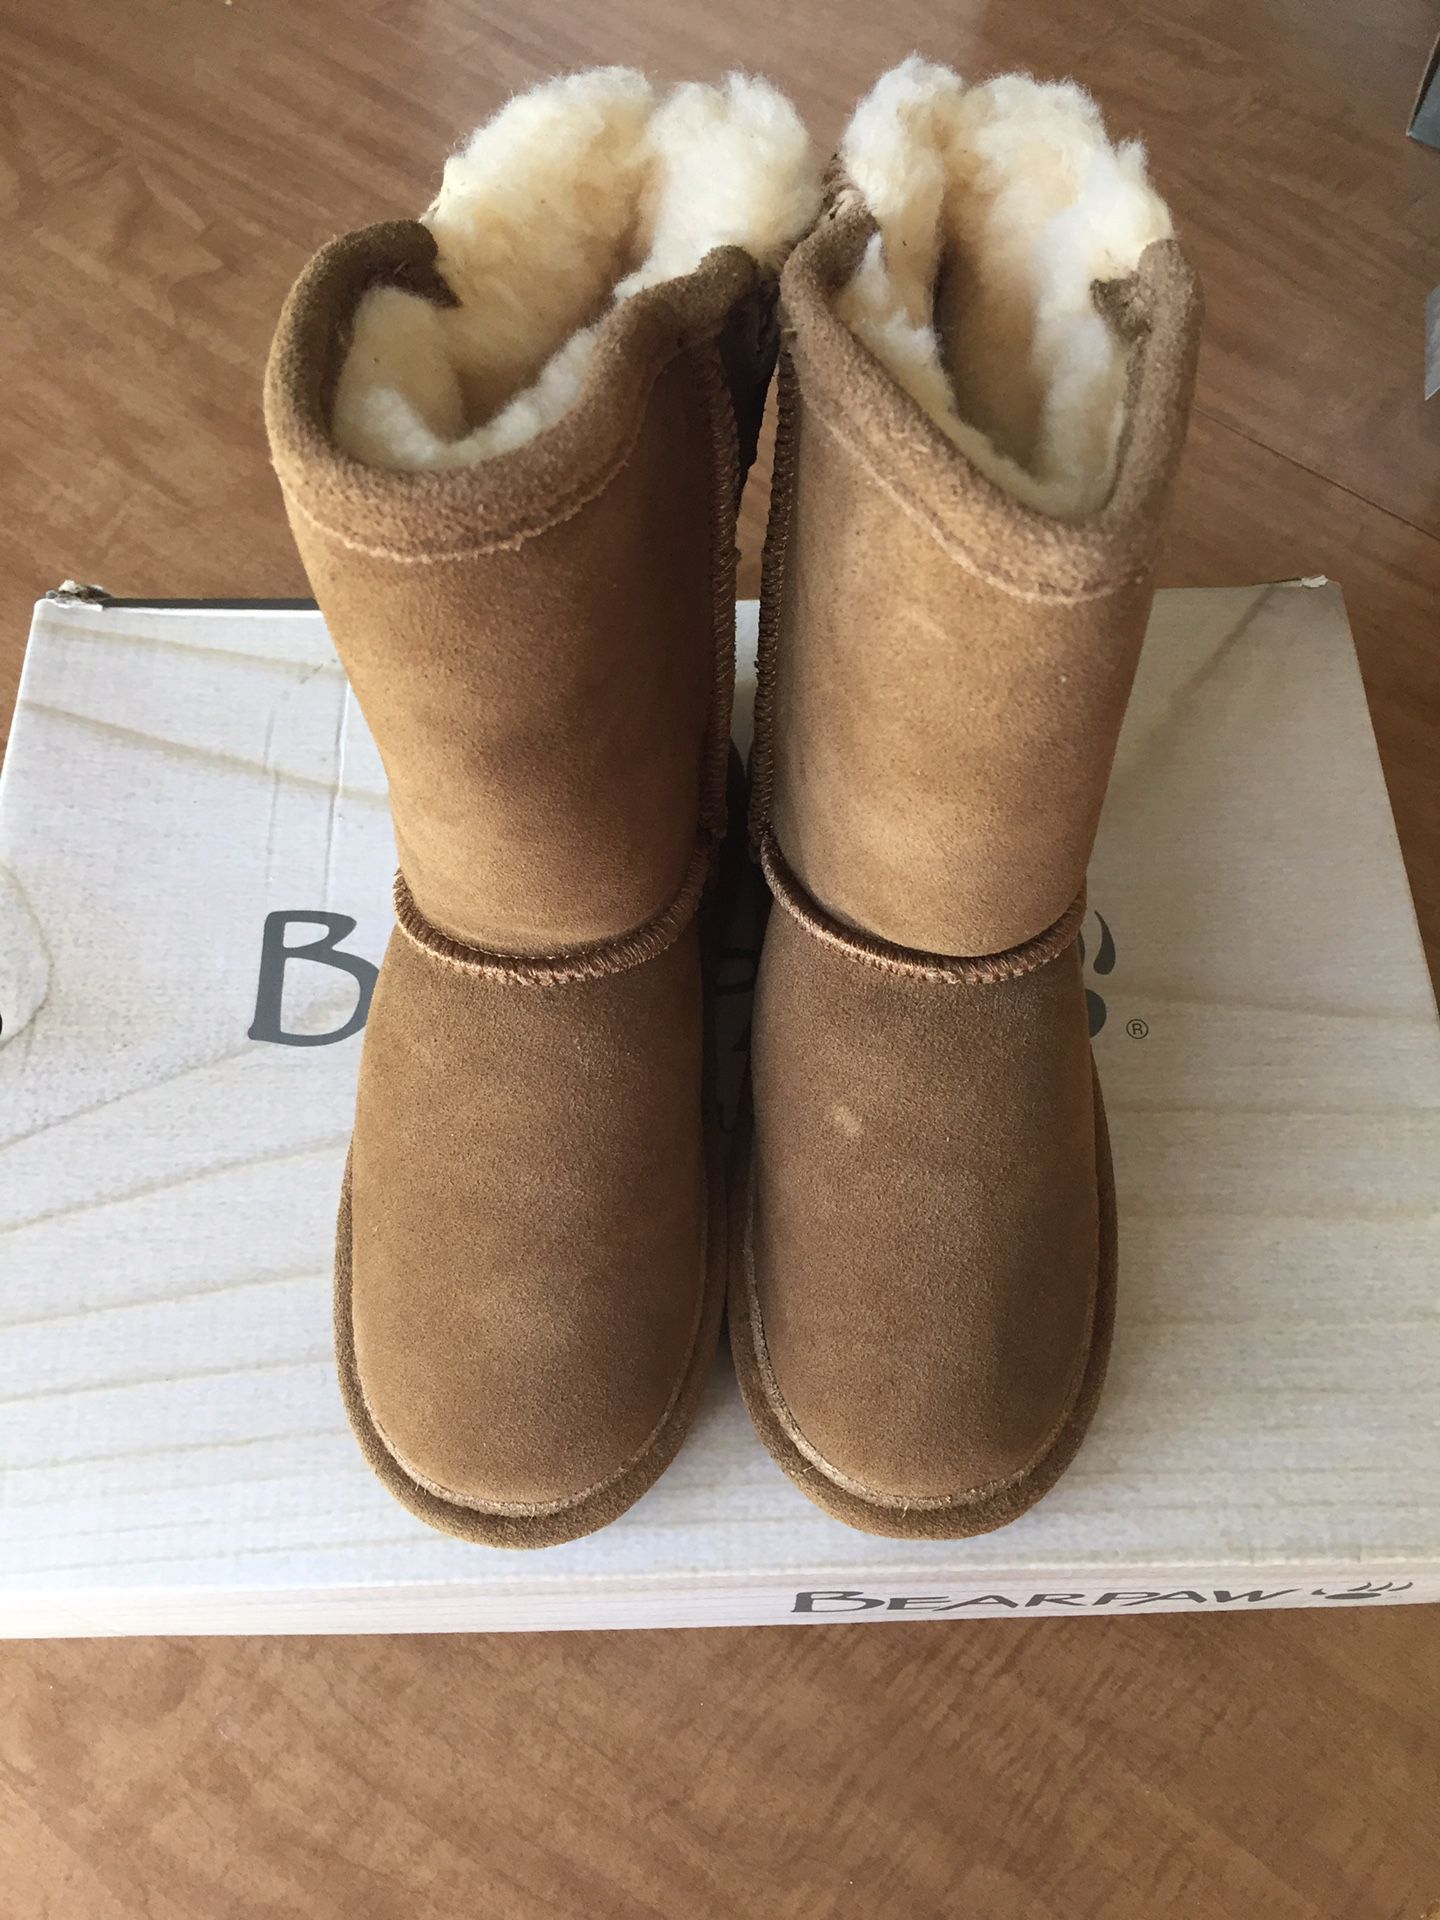 Bearpaw boots kids size 13 and 1 (brand new)